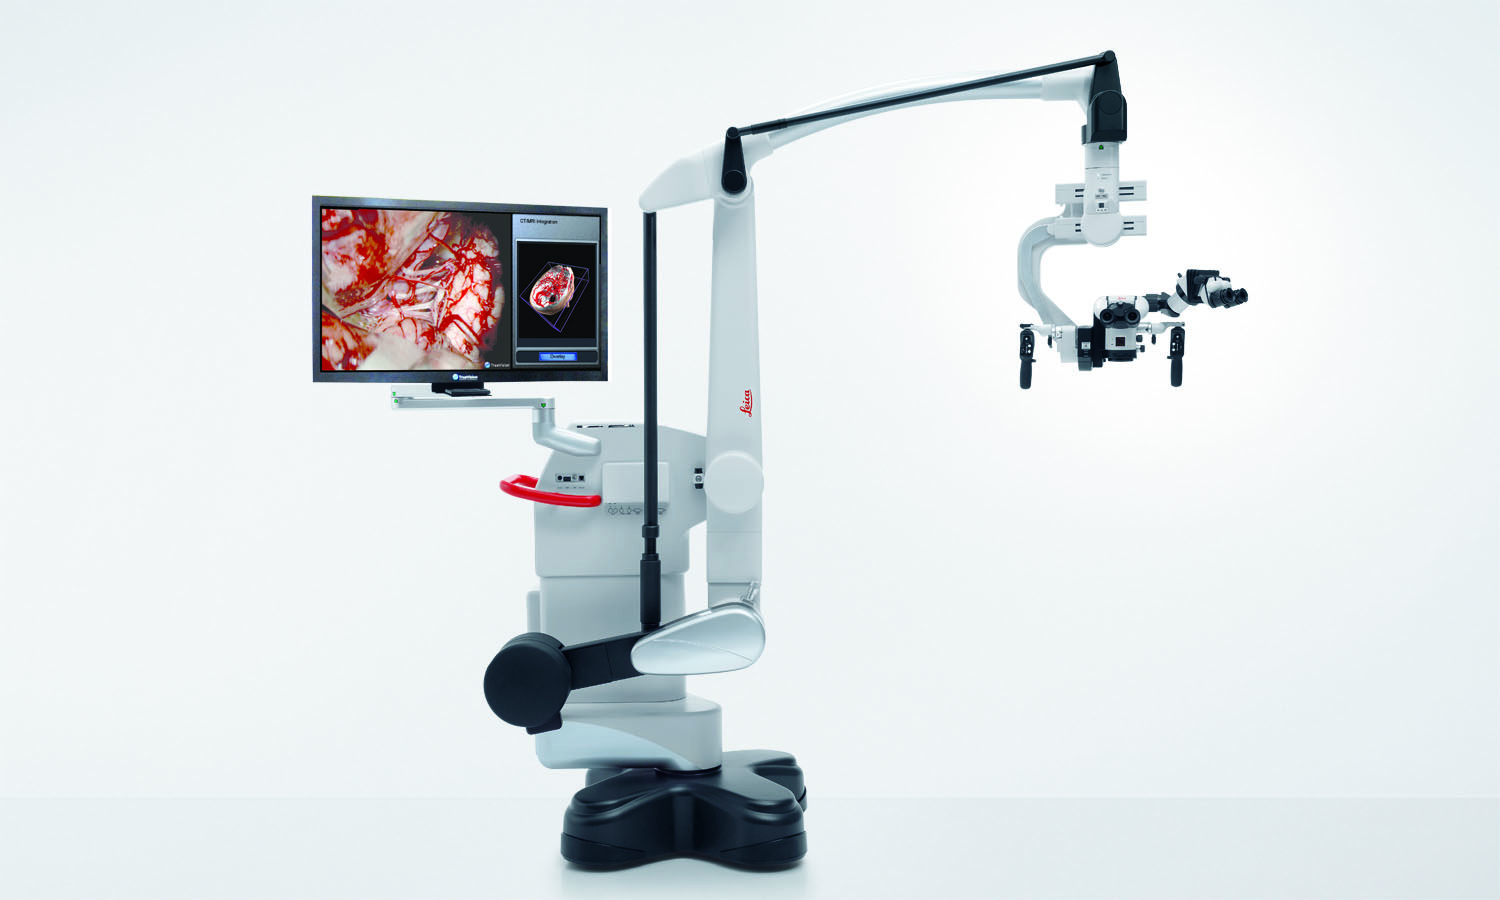 Leica TCS SP8 STED 3X super-resolution system revealing the full spectrum of life in 3D - fast and directly